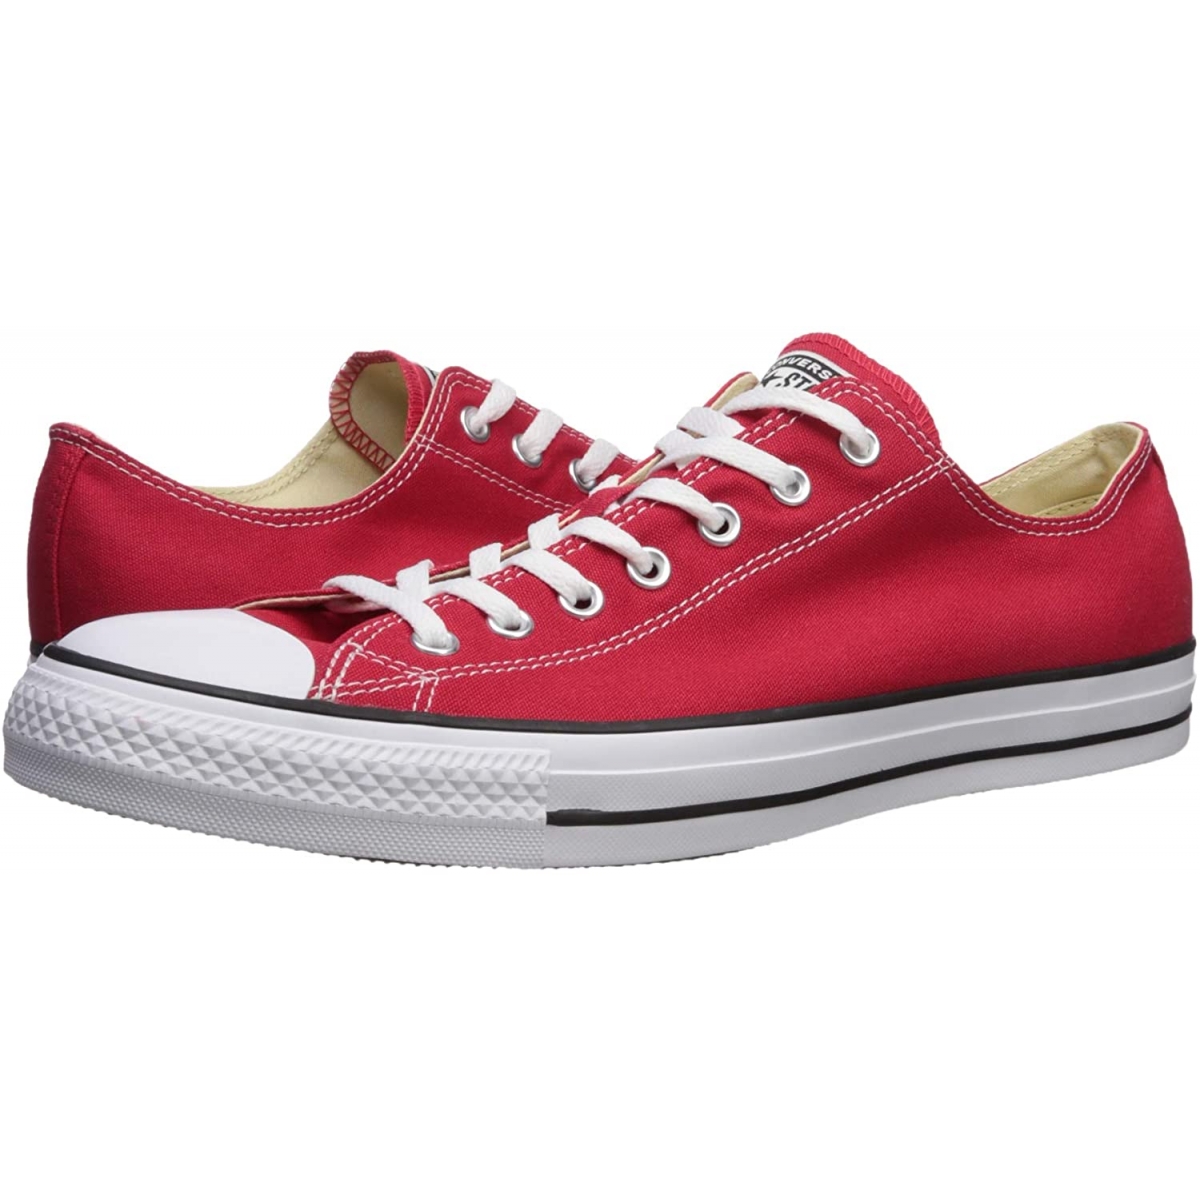 London Appropriate poor Converse Chuck Taylor All Star Core Ox Classic Red – PK-Shoes